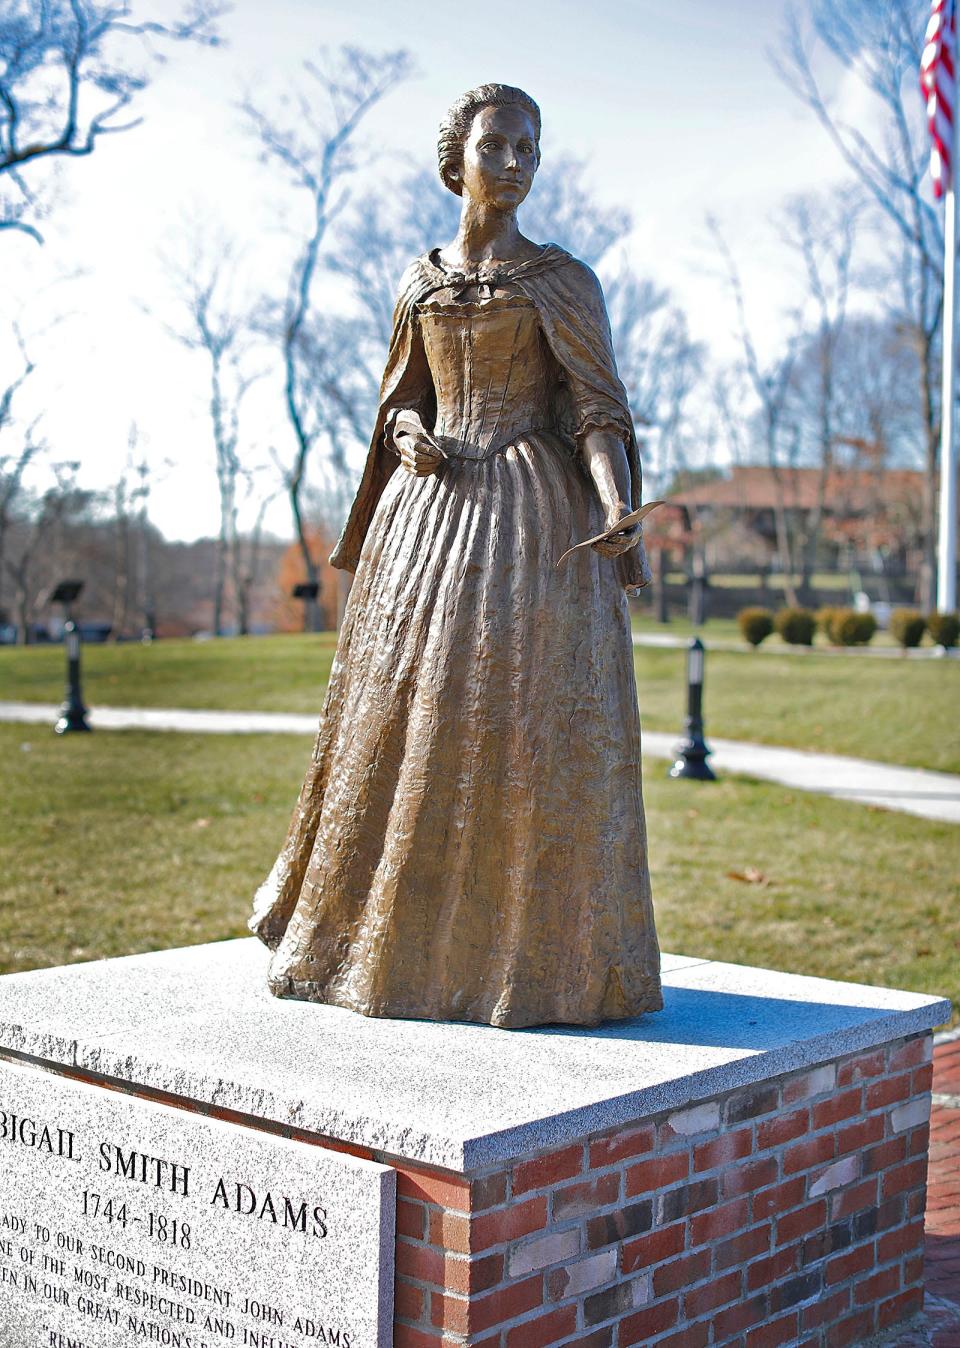 The focal point of Weymouth's new Heritage Park is a bronze statue of Abigail Adams, who was born in Weymouth.